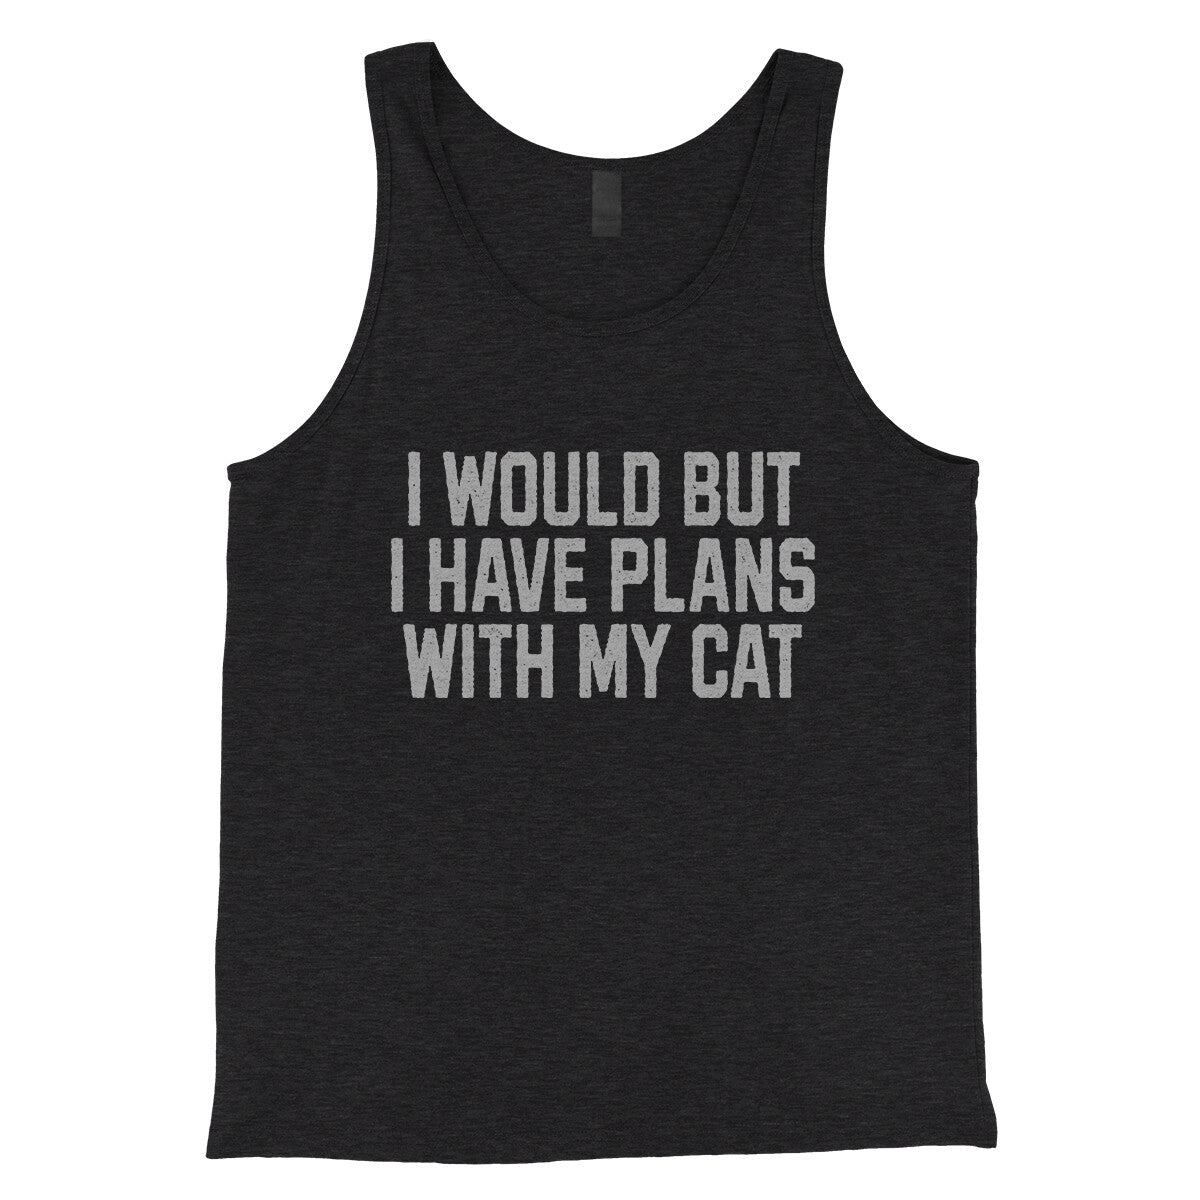 I Would but I Have Plans with My Cat in Charcoal Black TriBlend Color